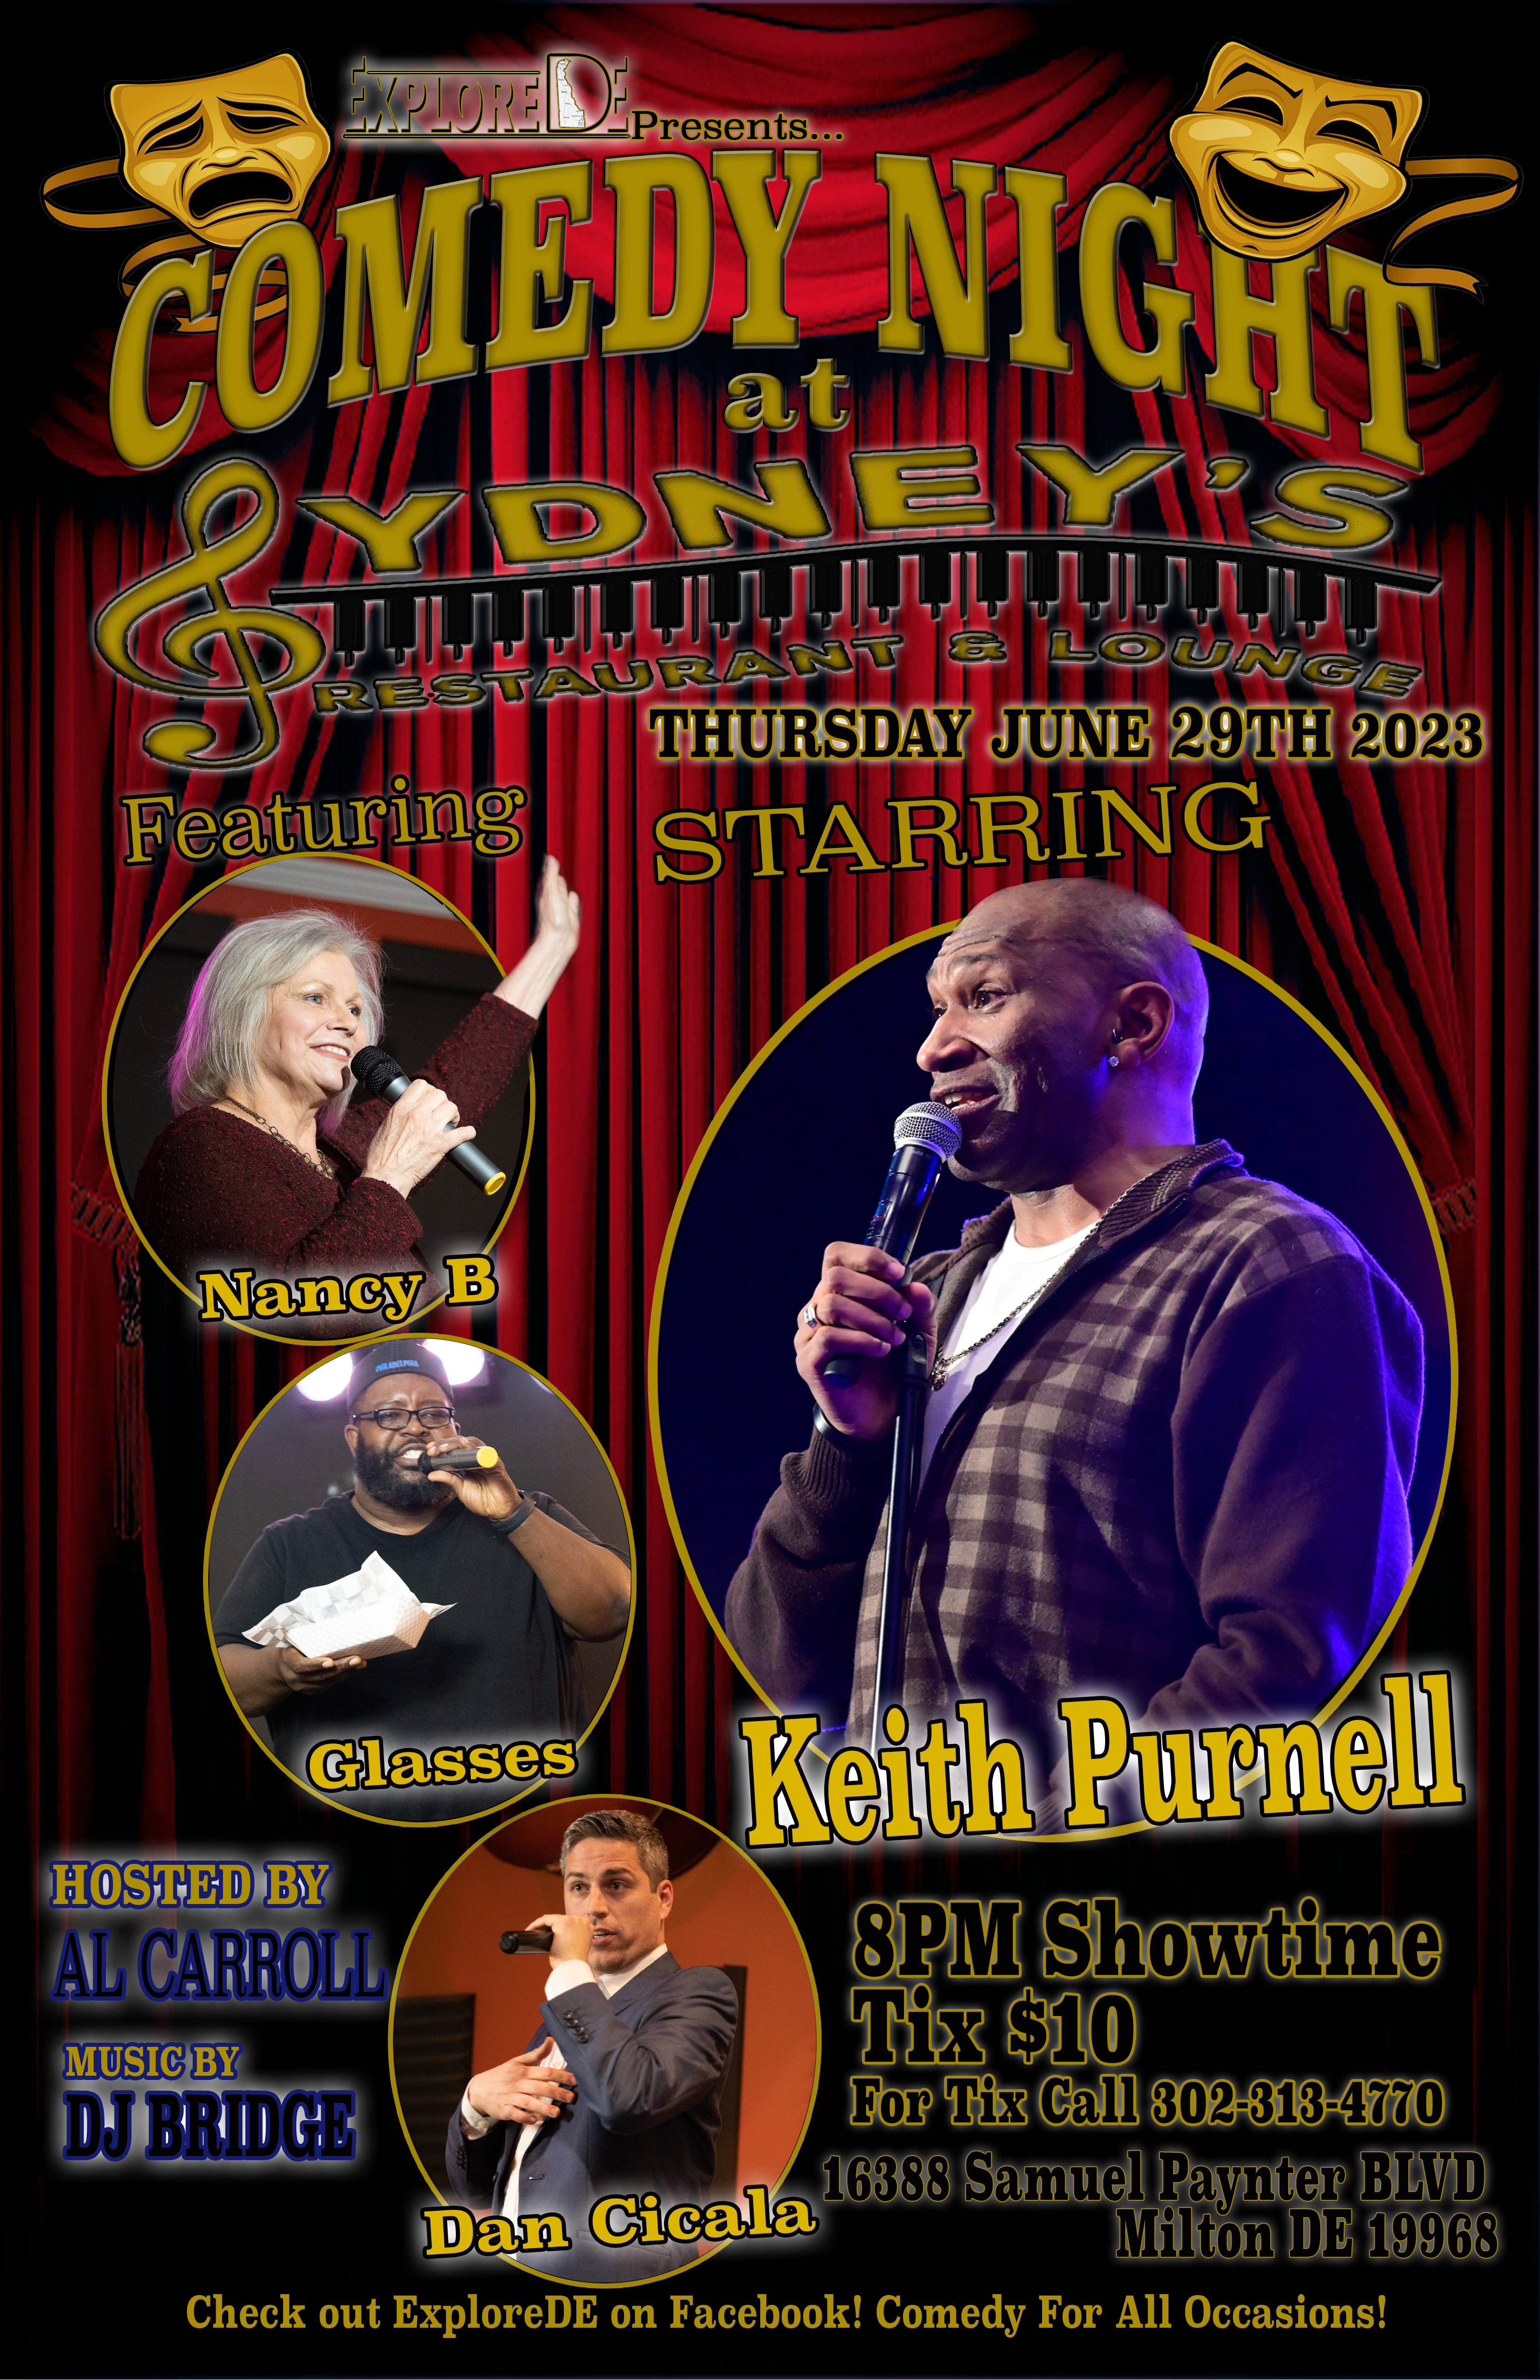 Thursday Comedy Night hosted by Al Carroll starring Keith Purnell -8pm showtime